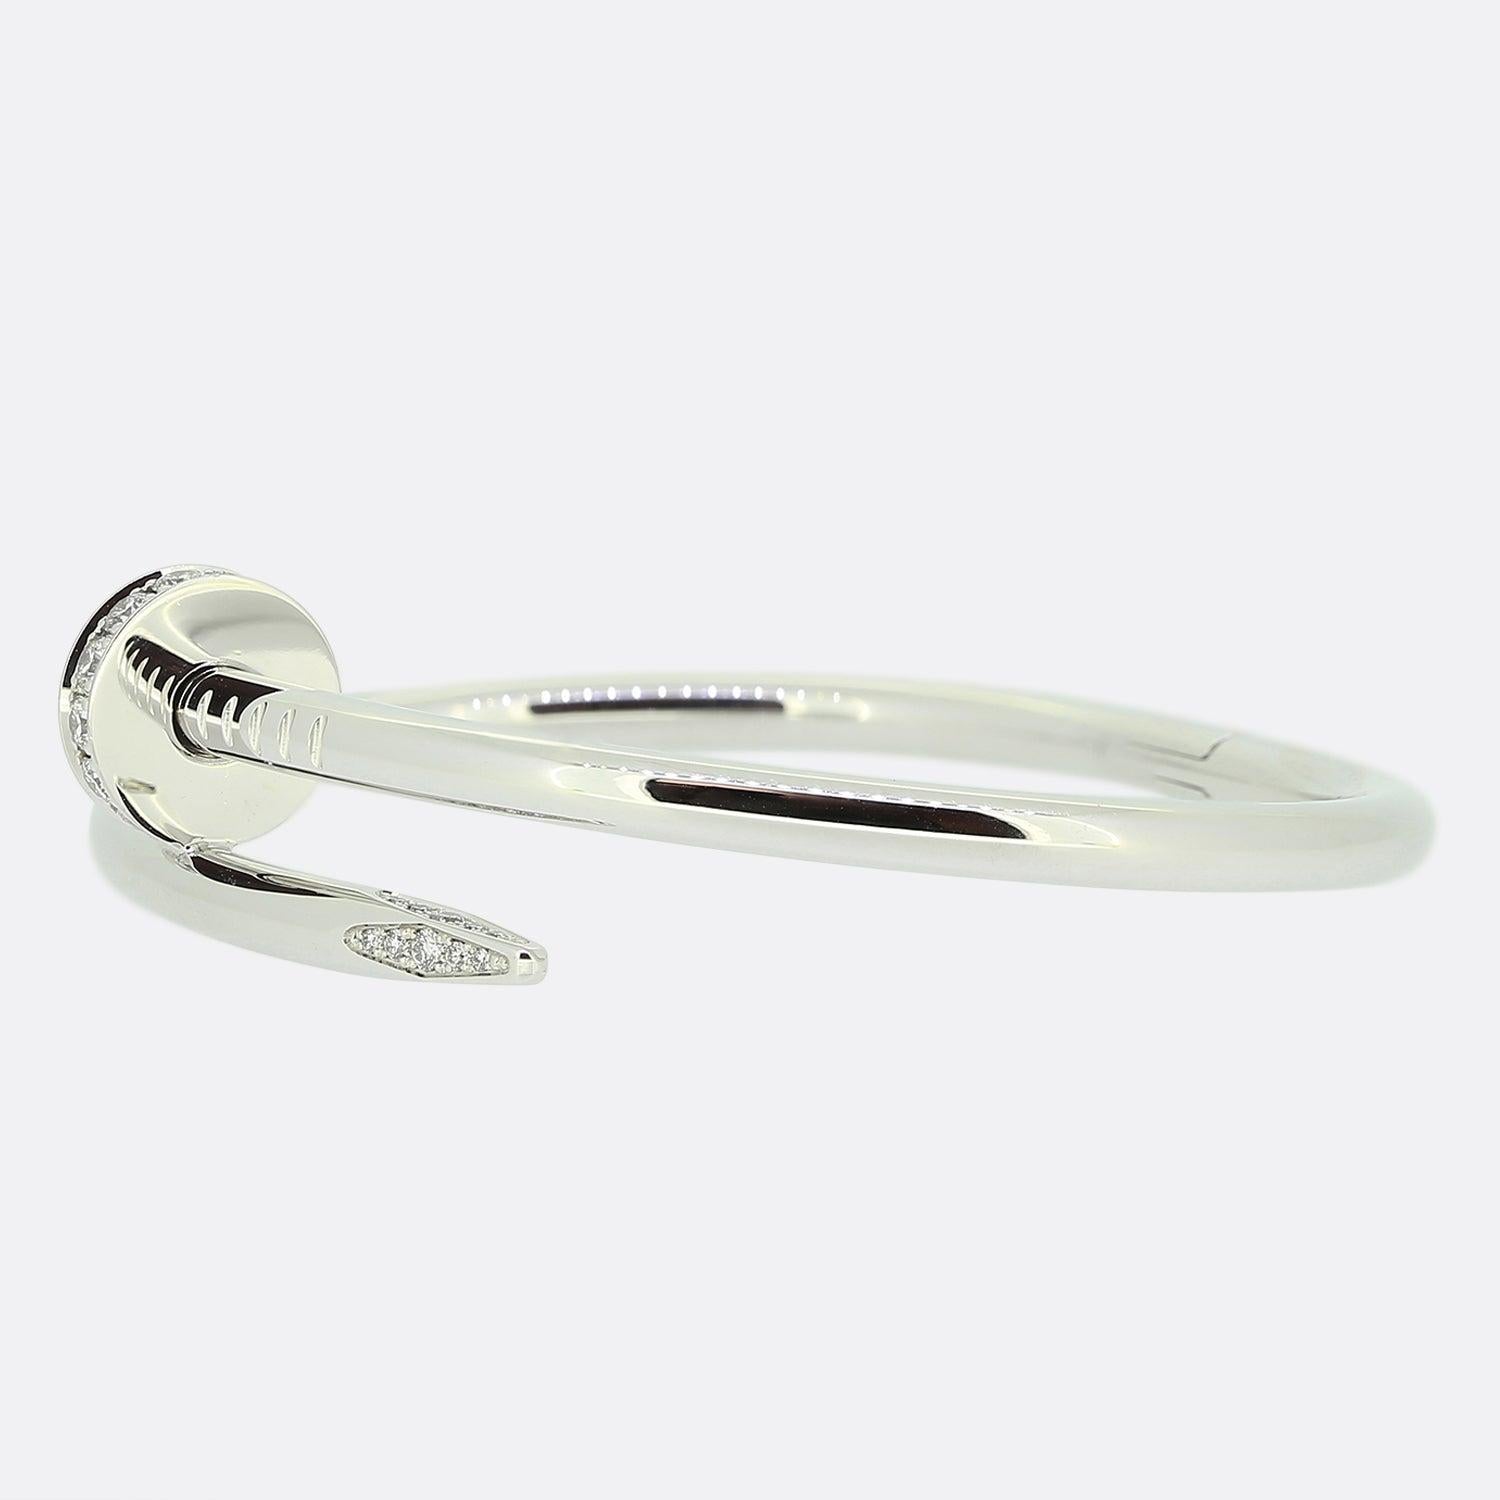 Here we have an 18ct white gold bracelet from the world renowned luxury jewellery house of Cartier. This piece forms part of their iconic Juste un Clou collection and showcases a wrap around nail design with a diamond set head and tip. This is the